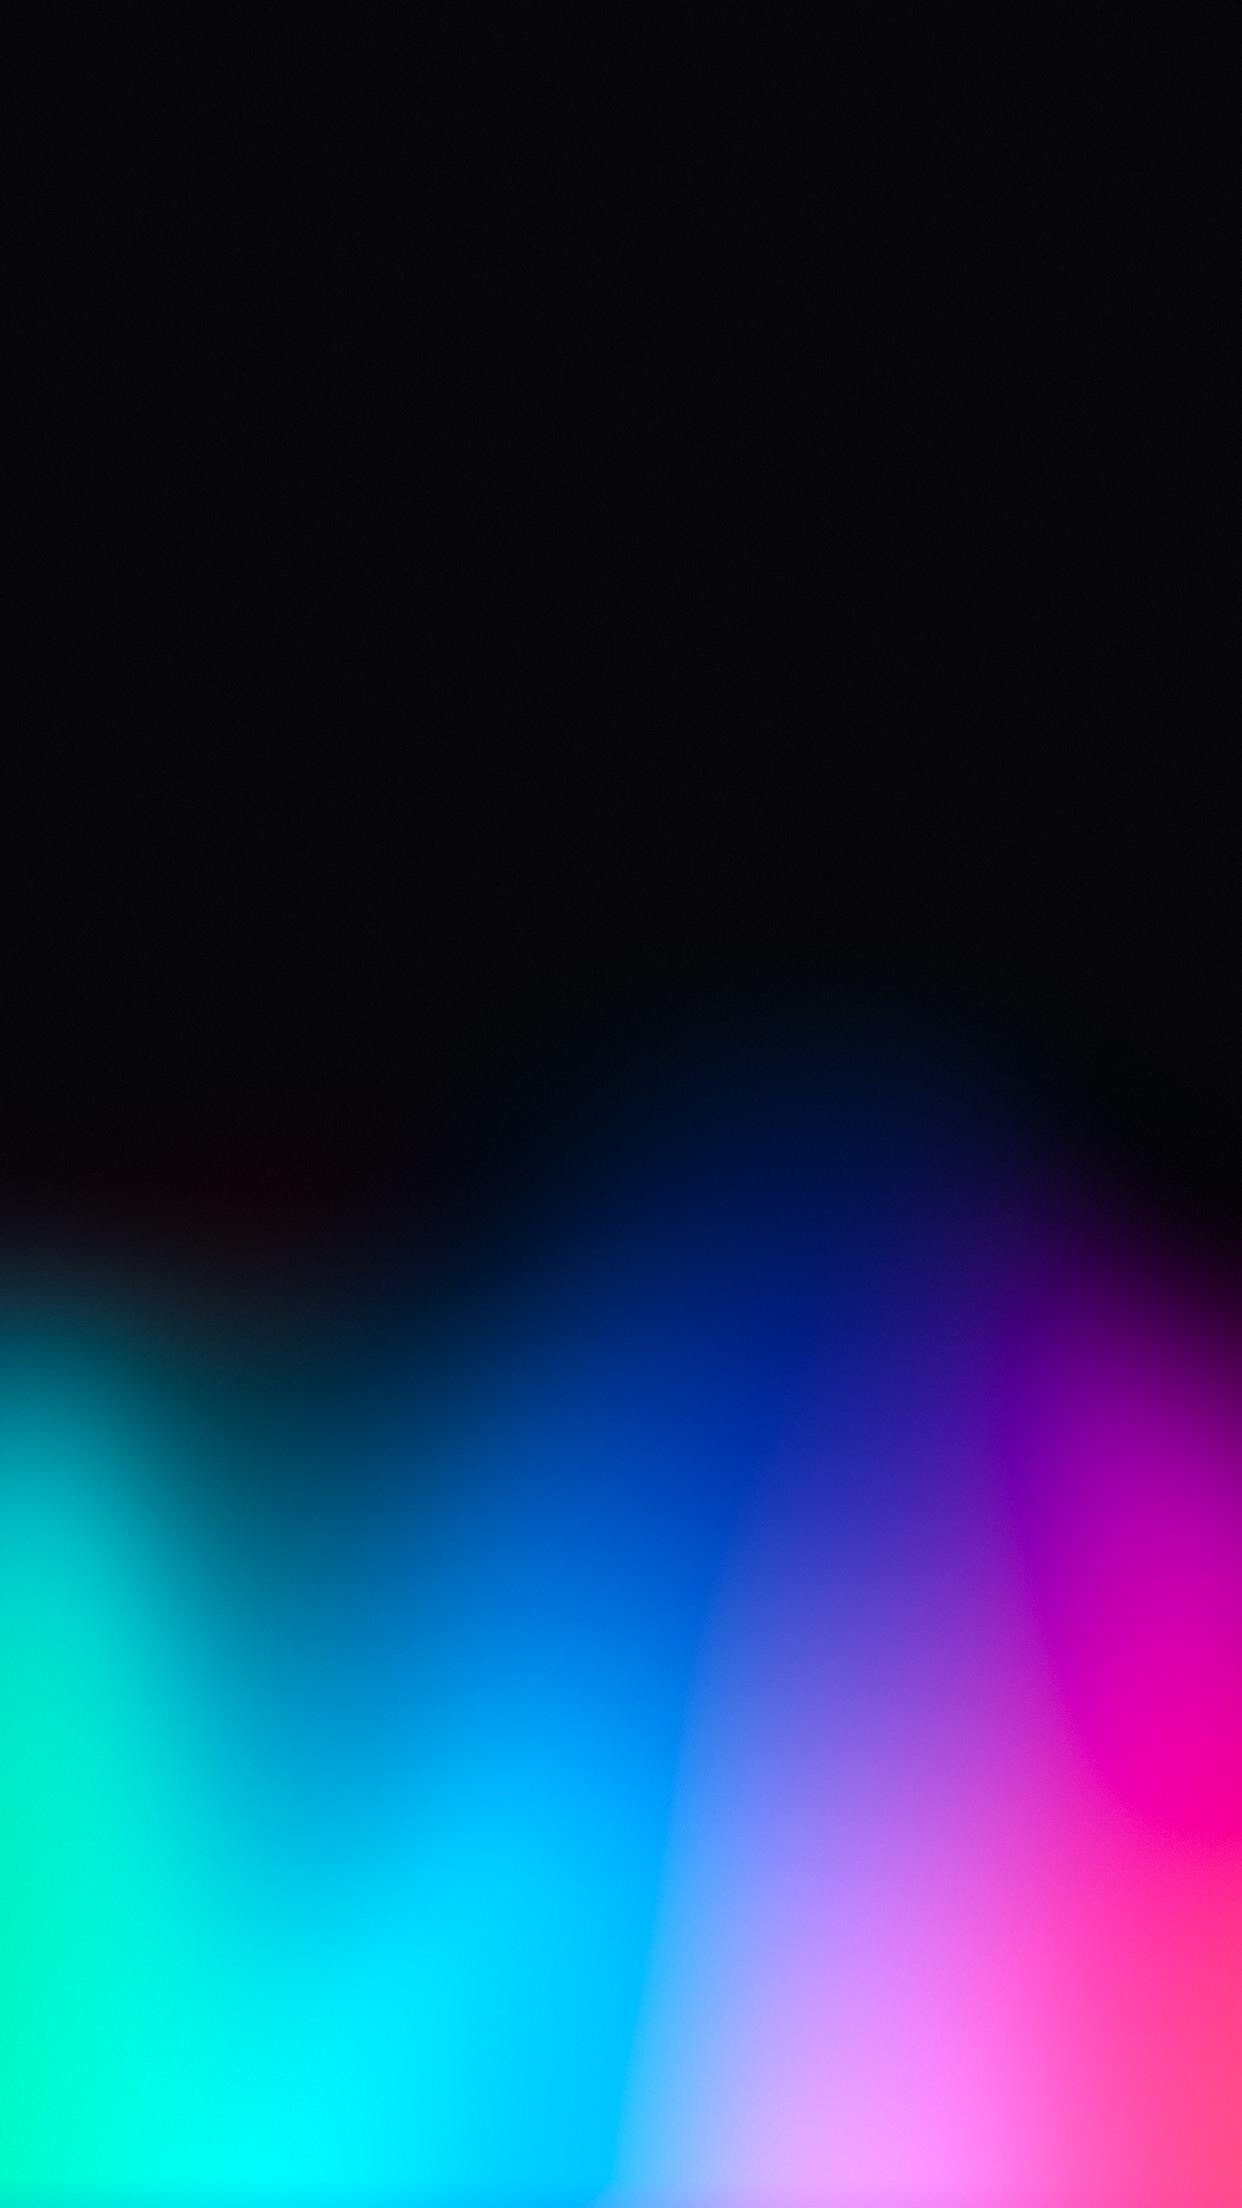 discussion Try out this wallpaper on your lock screen! The way the colors fade in is amazing